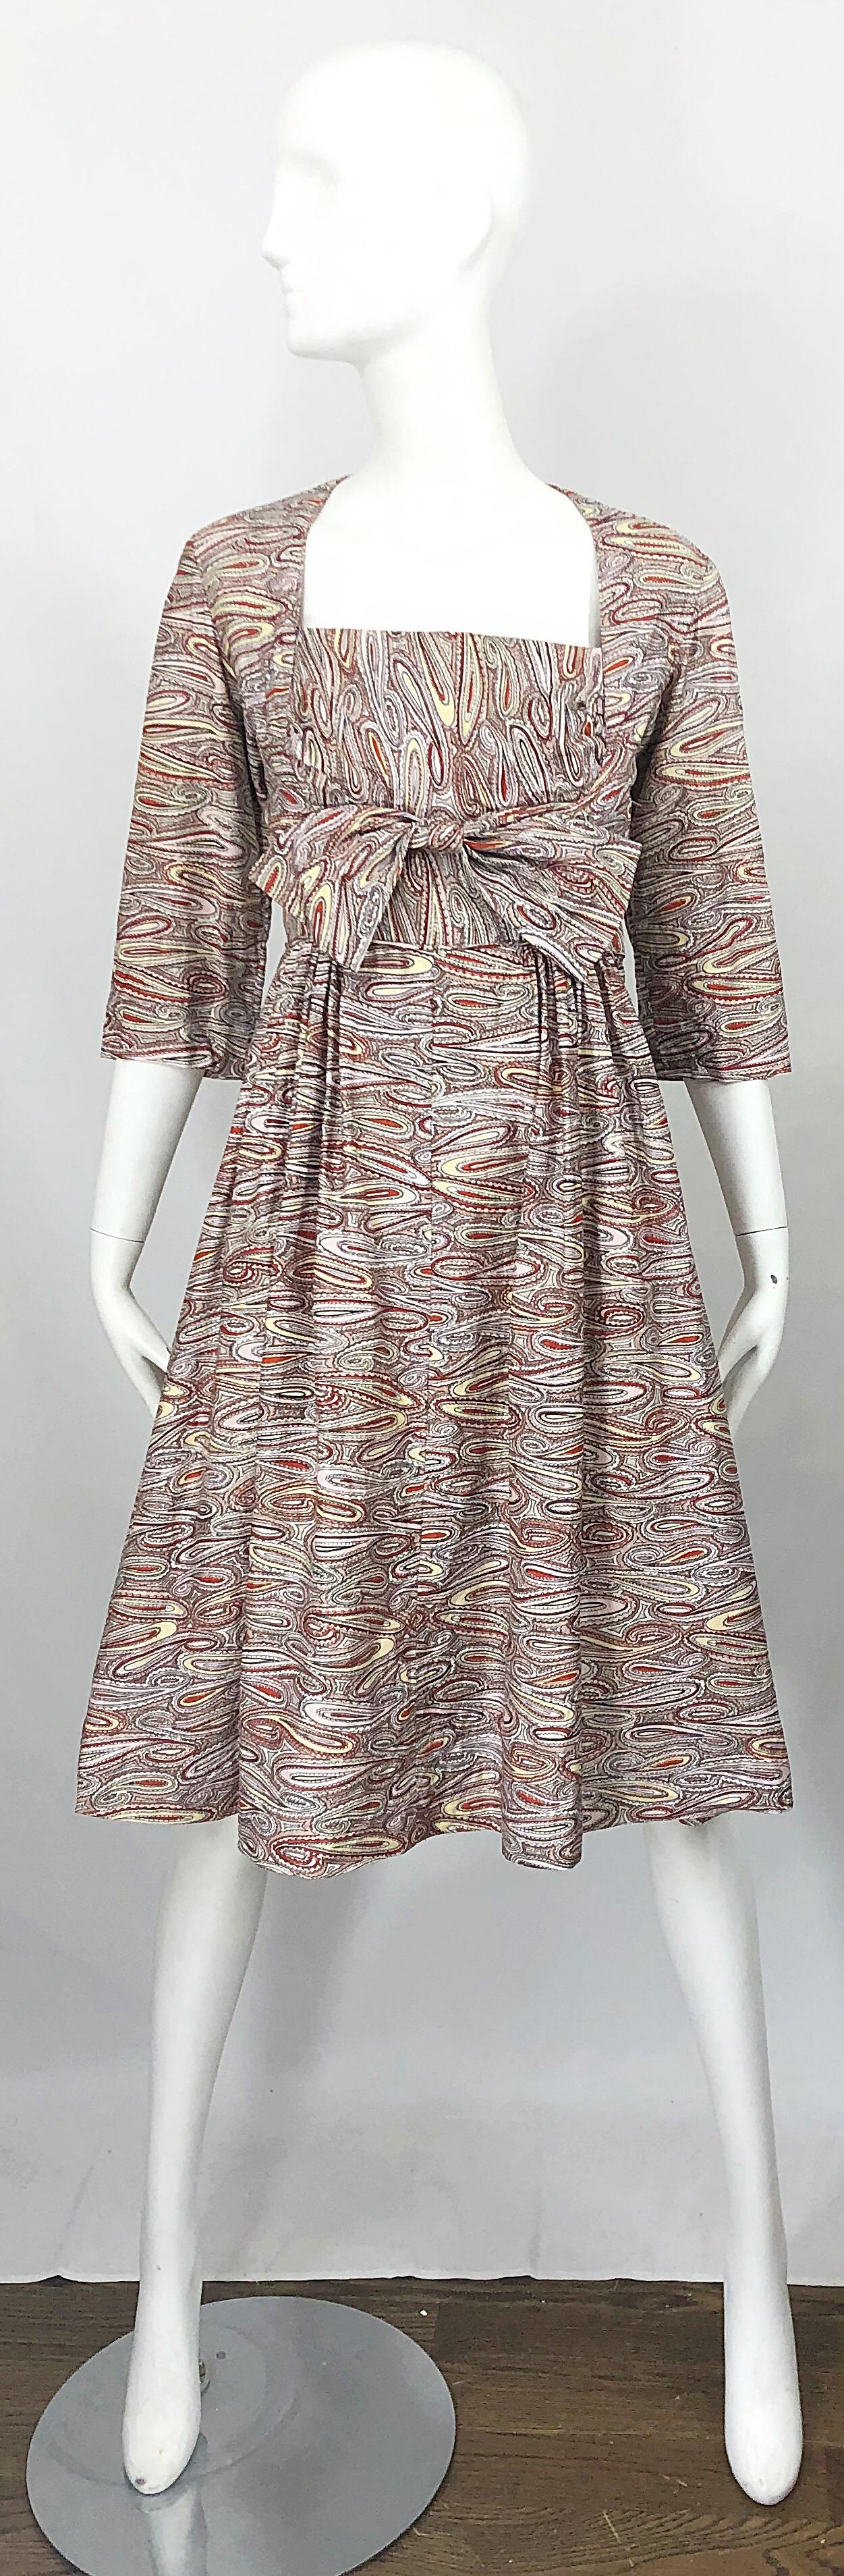 Chic 1950s paisley fit n' flare cotton dress! Features ivory background with warm hues of maroon, orange, pale yellow nad ivory throughout. Shelf like bust with attached bow. Metal zipper up the side. Very well made, with heavy attention to details.